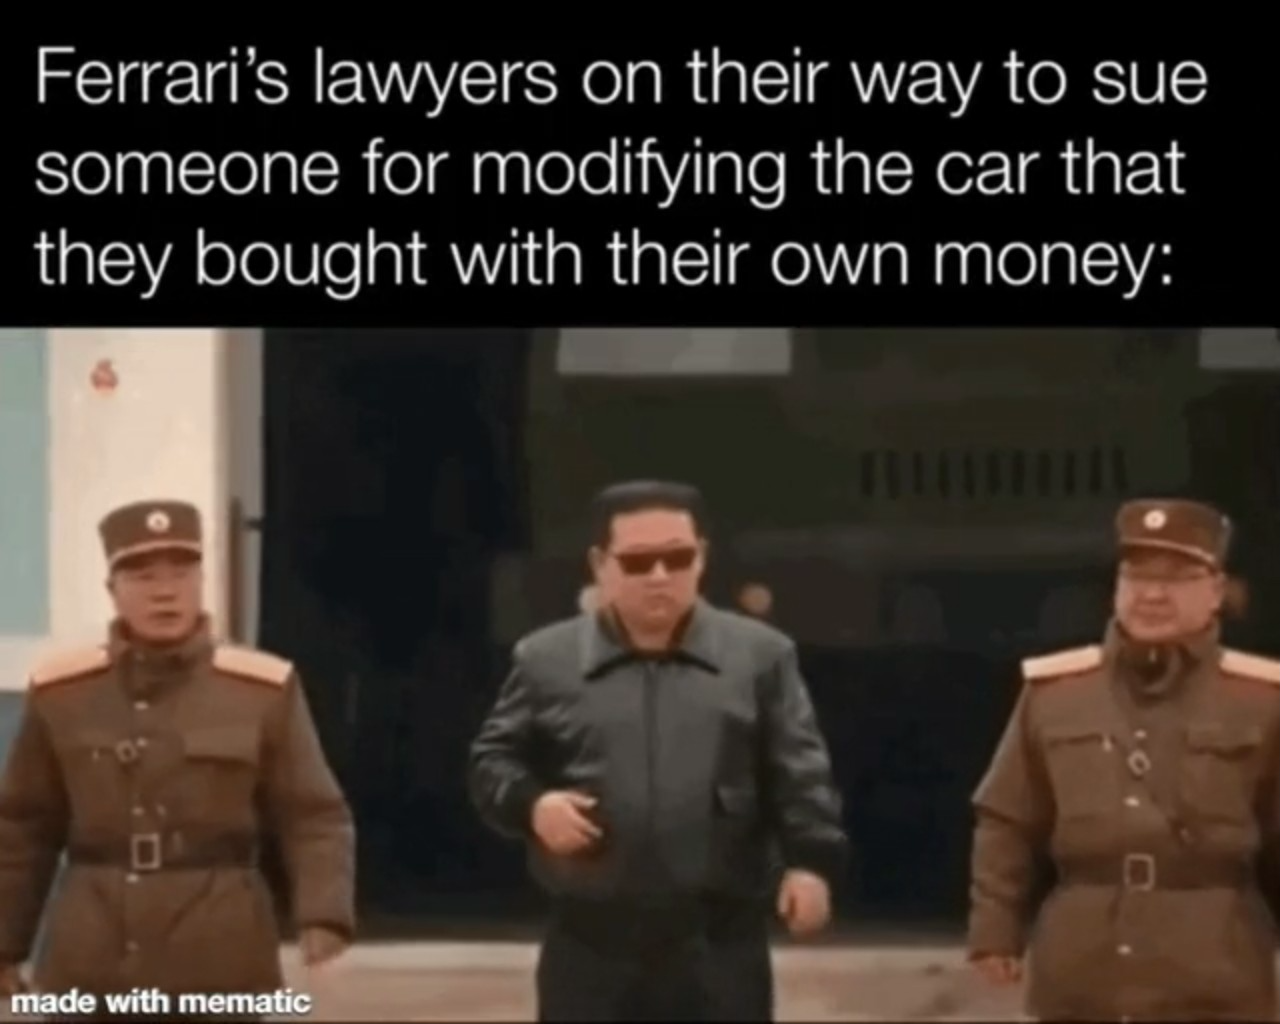 kim jong un hollywood style - Ferrari's lawyers on their way to sue someone for modifying the car that they bought with their own money made with mematic